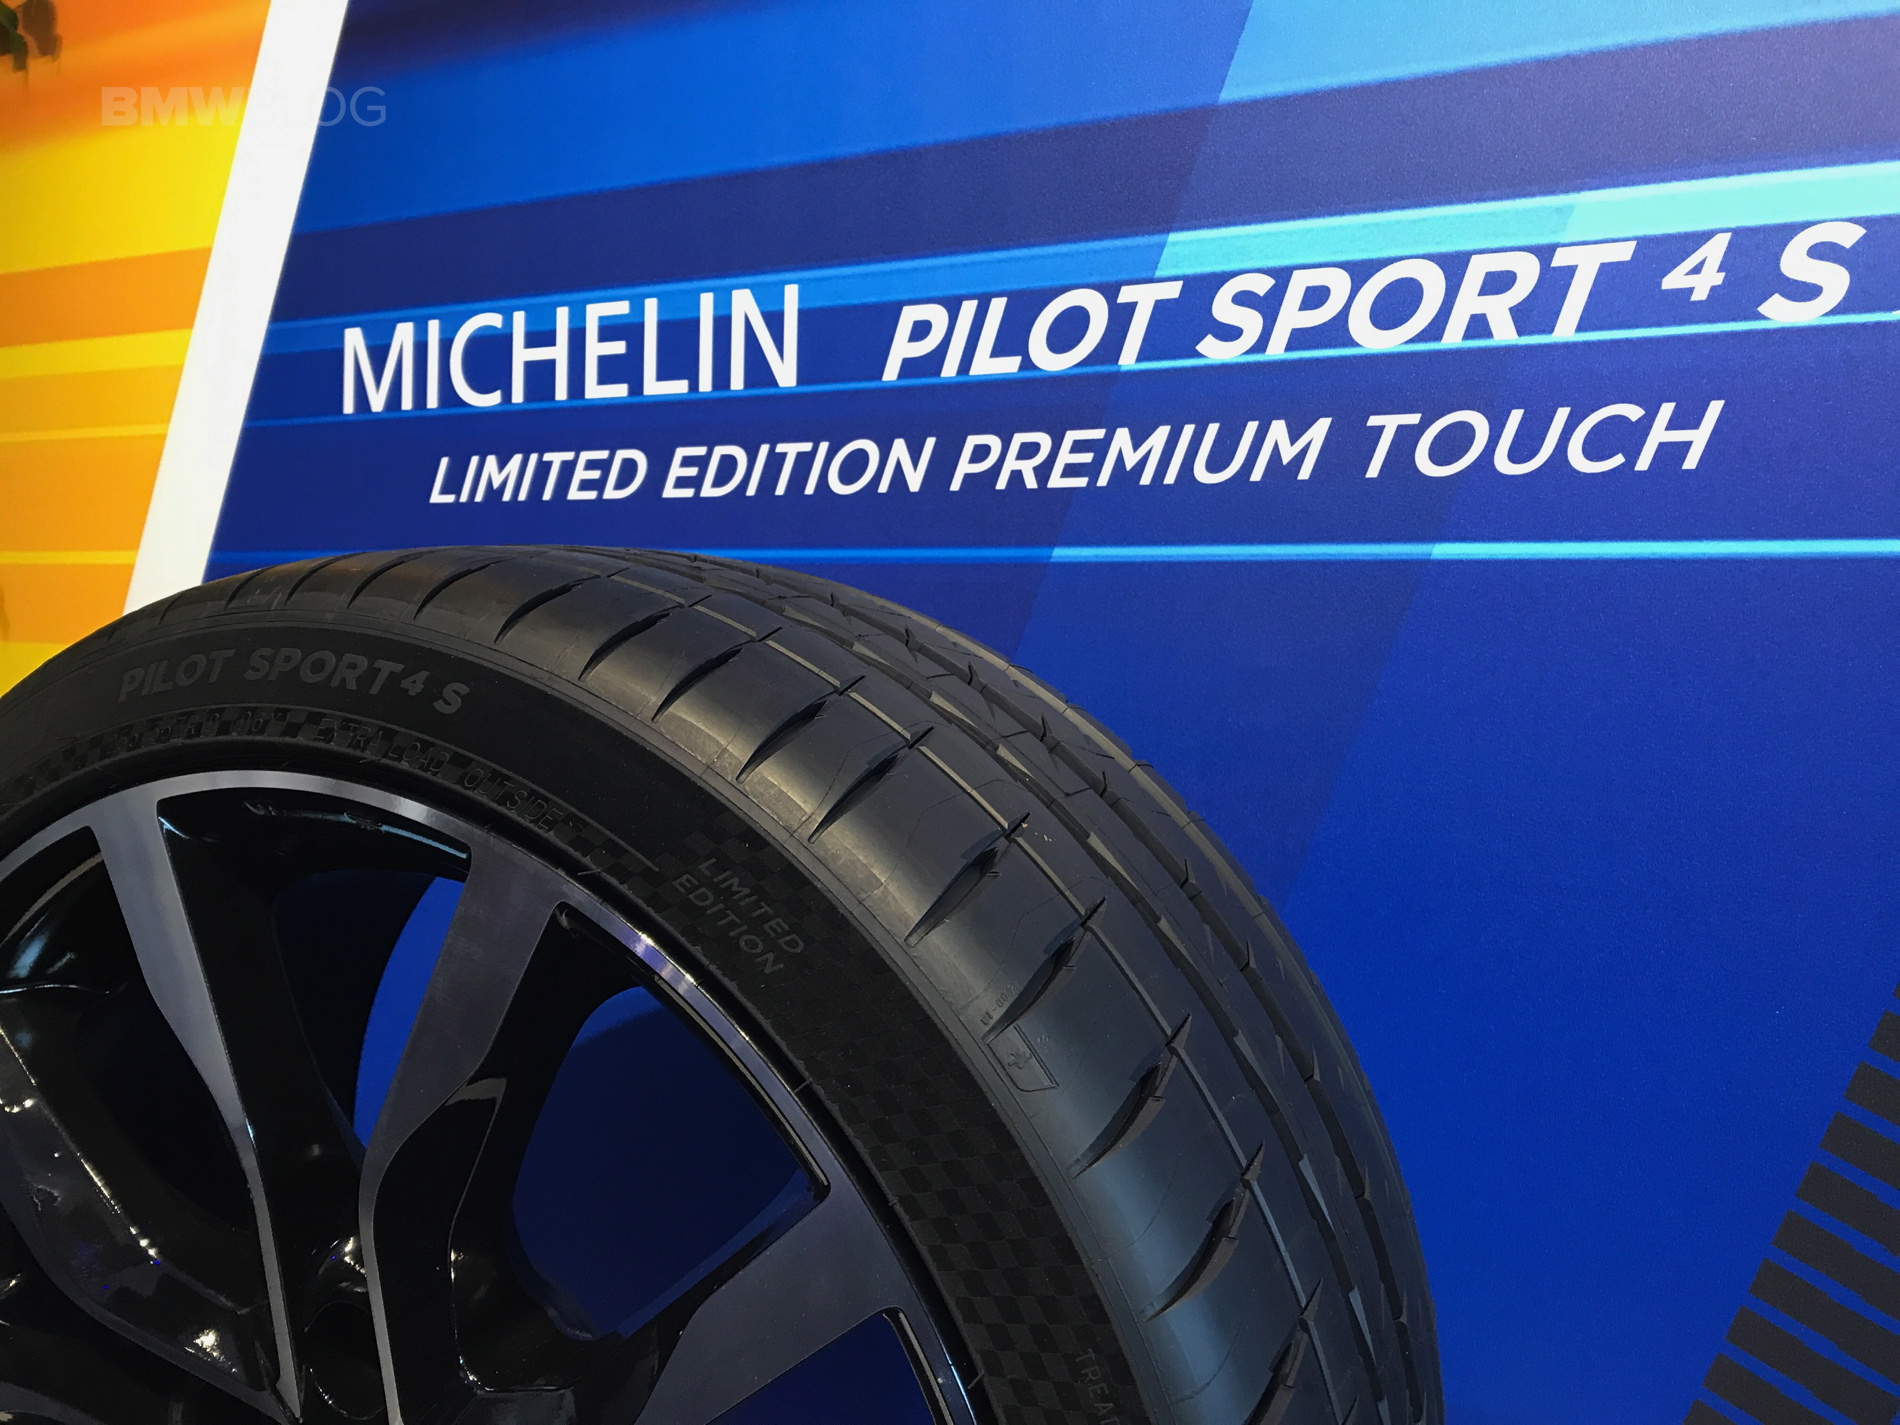 michelin-premium-touch-offers-new-design-look-for-pilot-sport-4-s